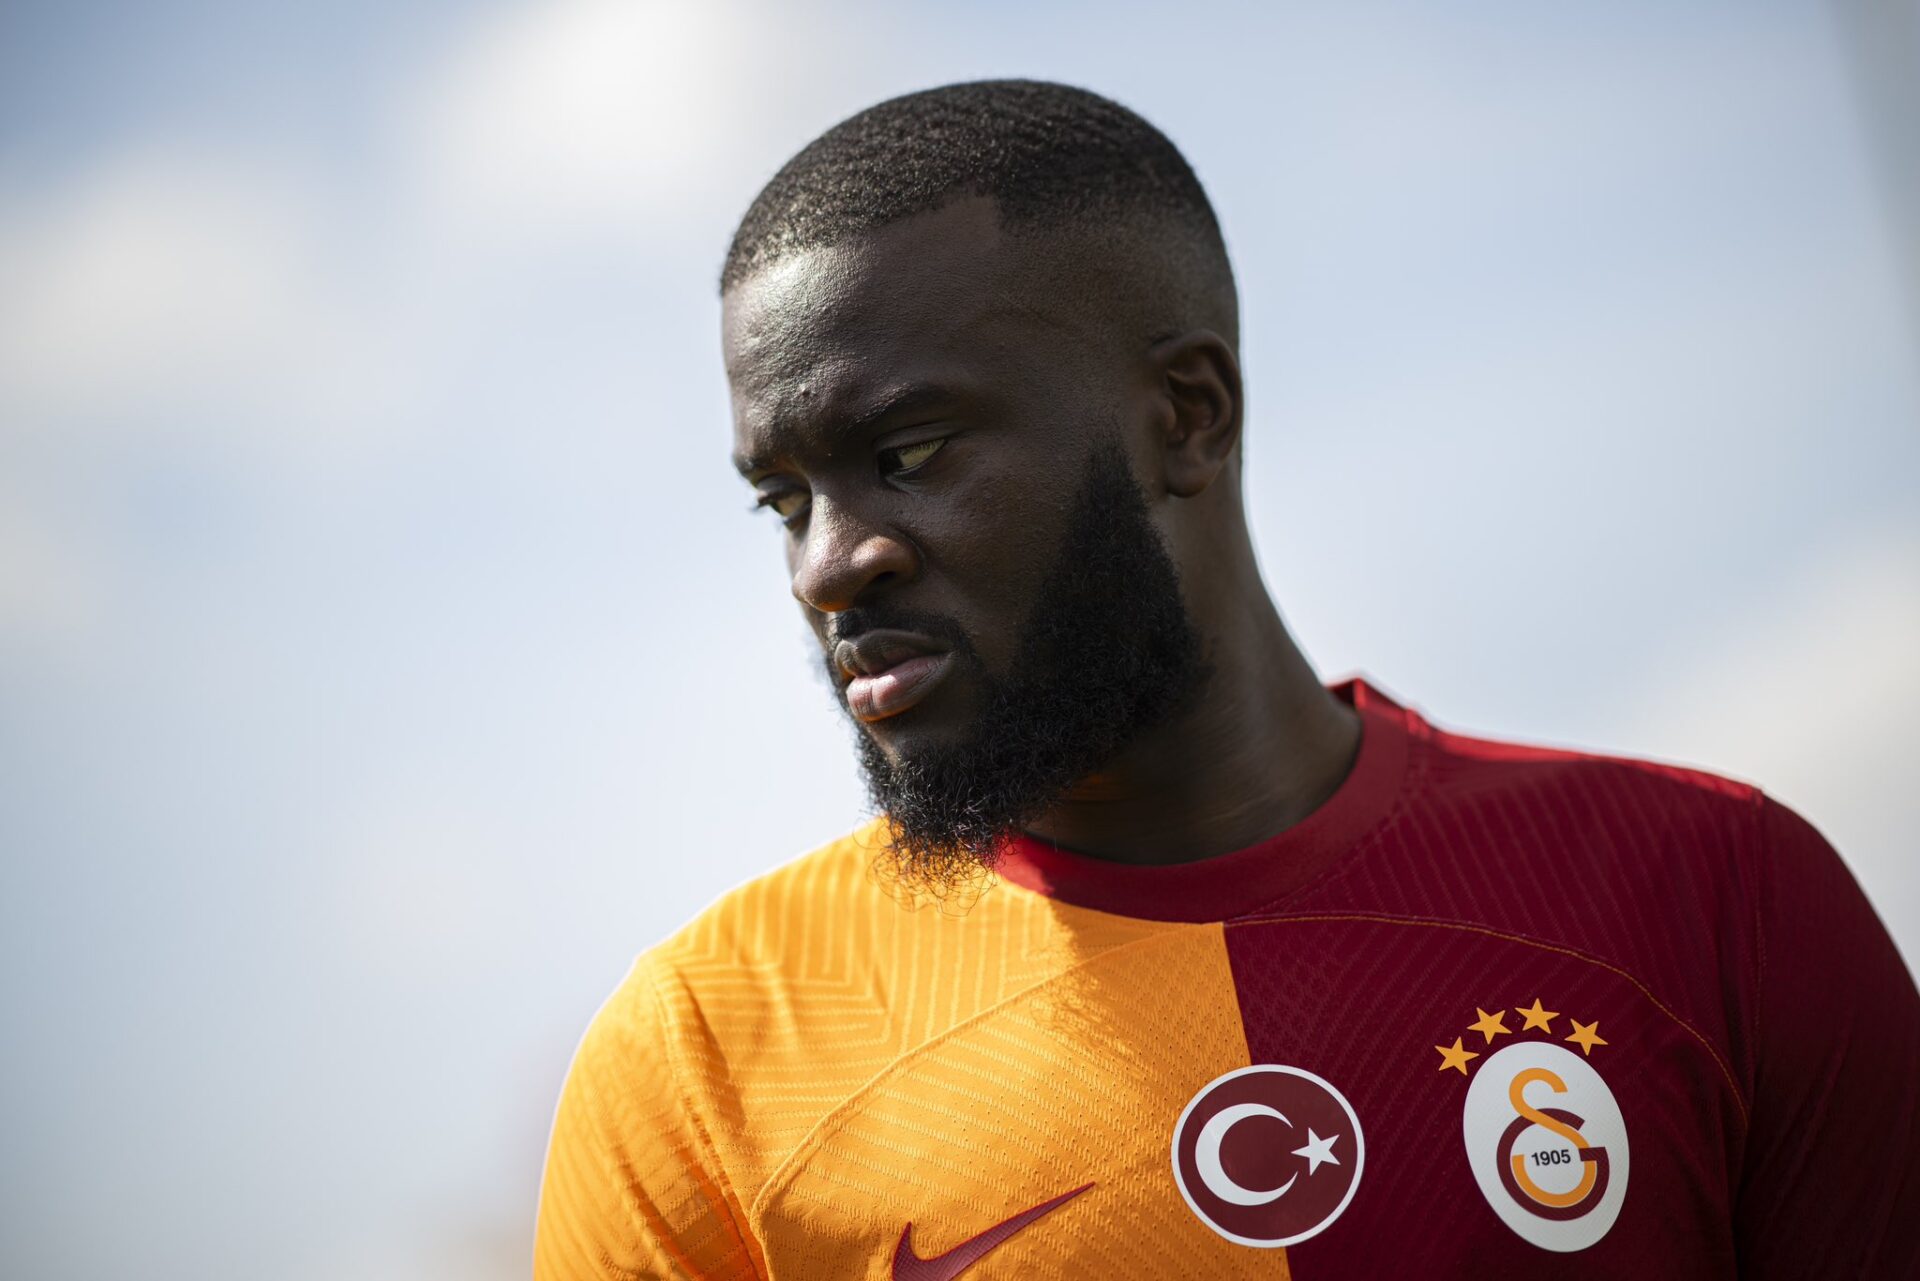 Tanguy Ndombele could return to Spurs from Galatasaray loan spell in January. 